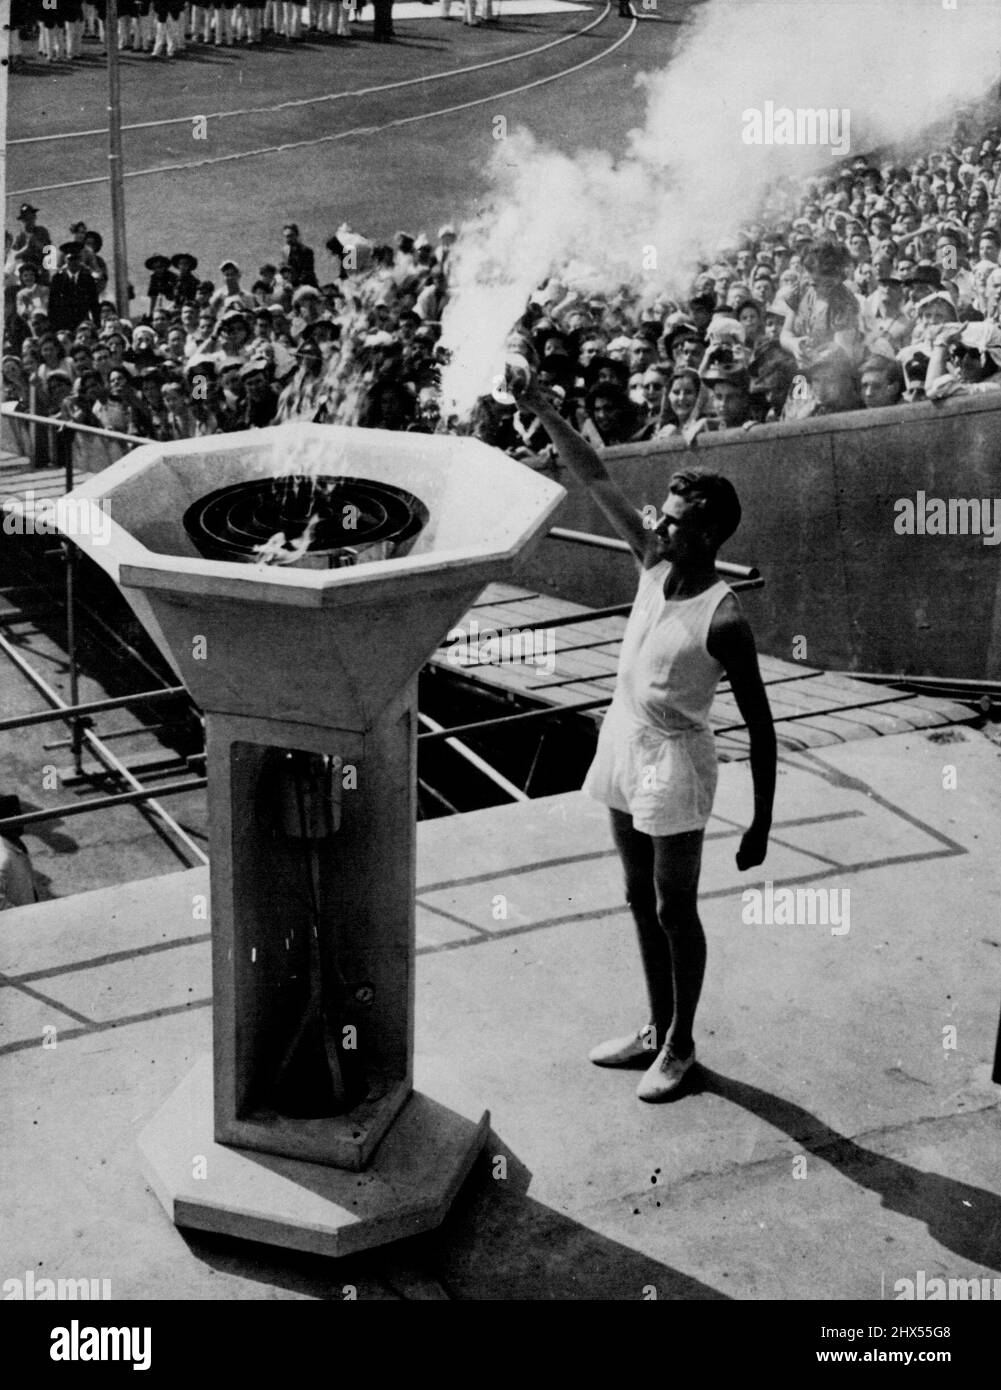 XIV Olympic Opens -- The mystery of the torchbearer who was to carry the final torch, ended when John Mark, a Cambridge Athletic blue arrived at the Wembley Stadim at 3.50 to perform the ceremony of lighting the Olympic Flame at the Opening of the 1948 Olympic Games. July 29, 1948. (Photo by Reuterphoto). Stock Photo